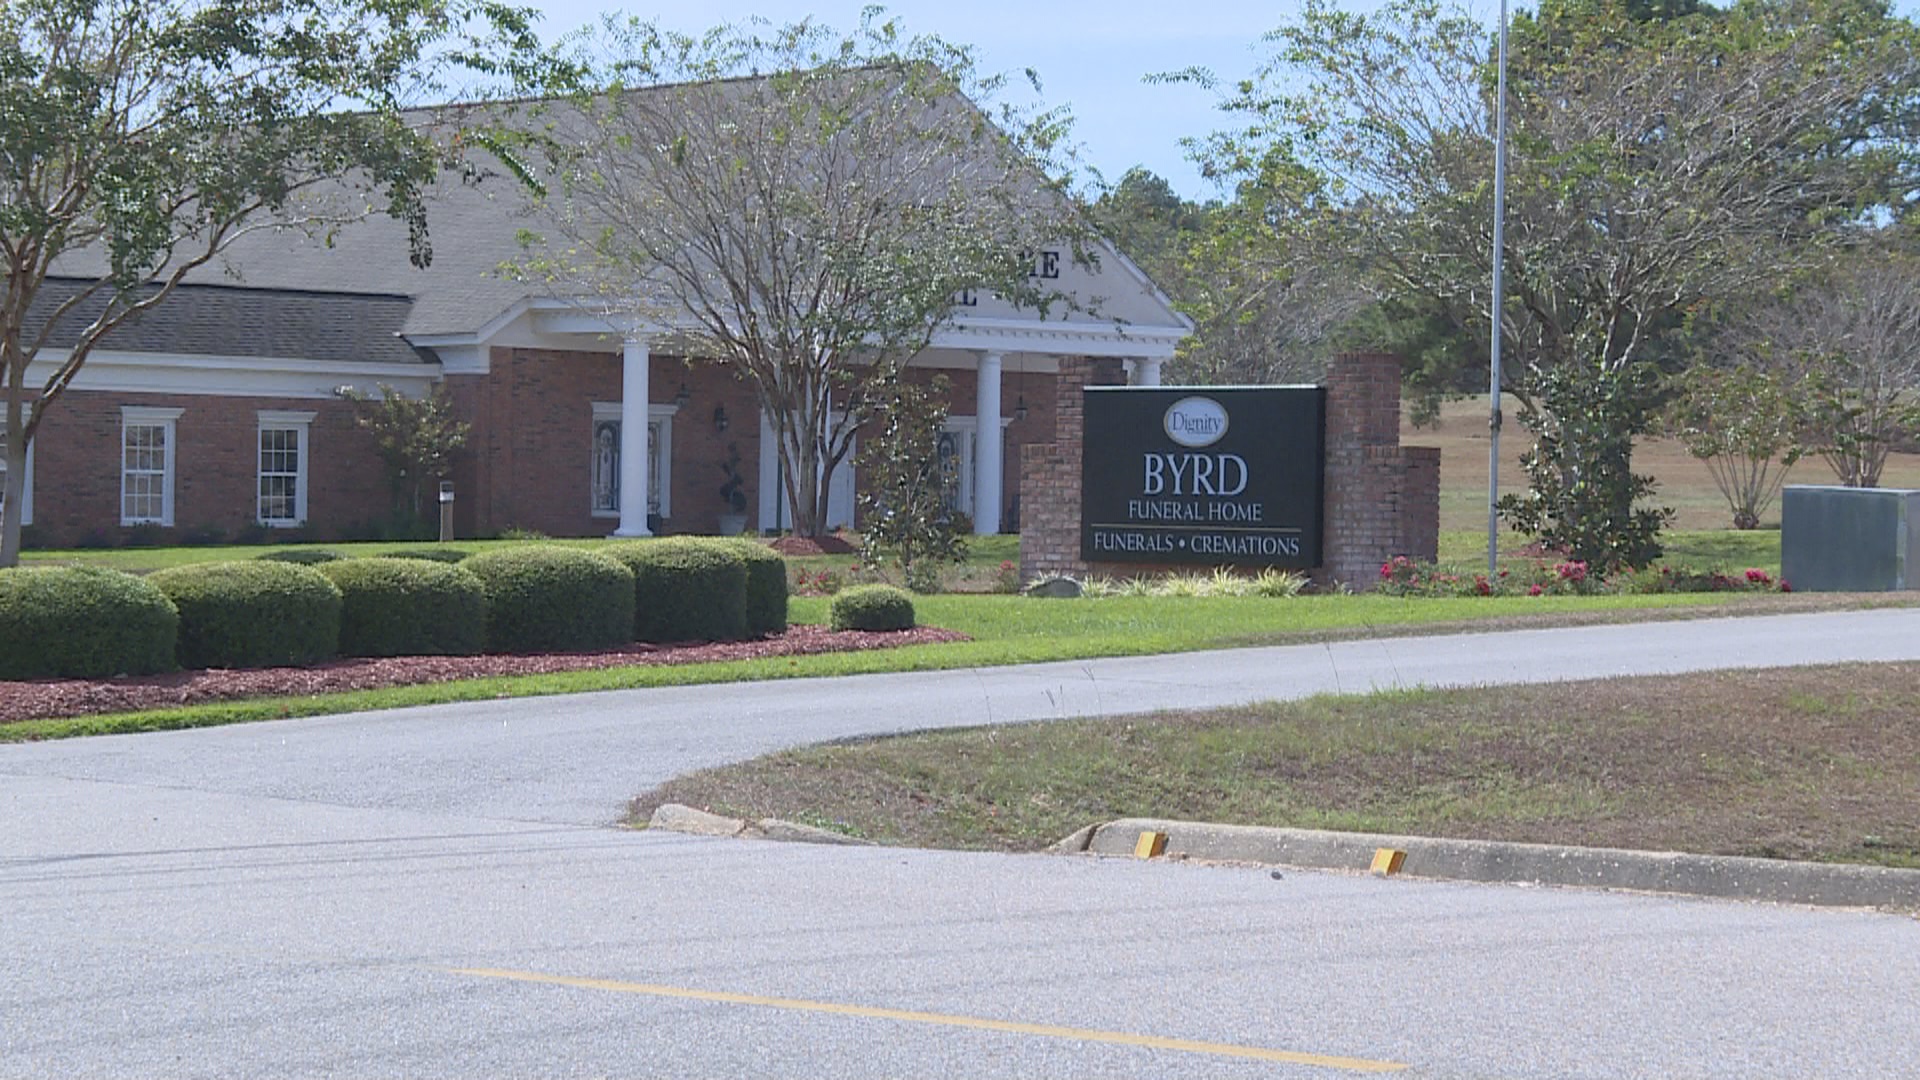 unity funeral home in dothan alabama